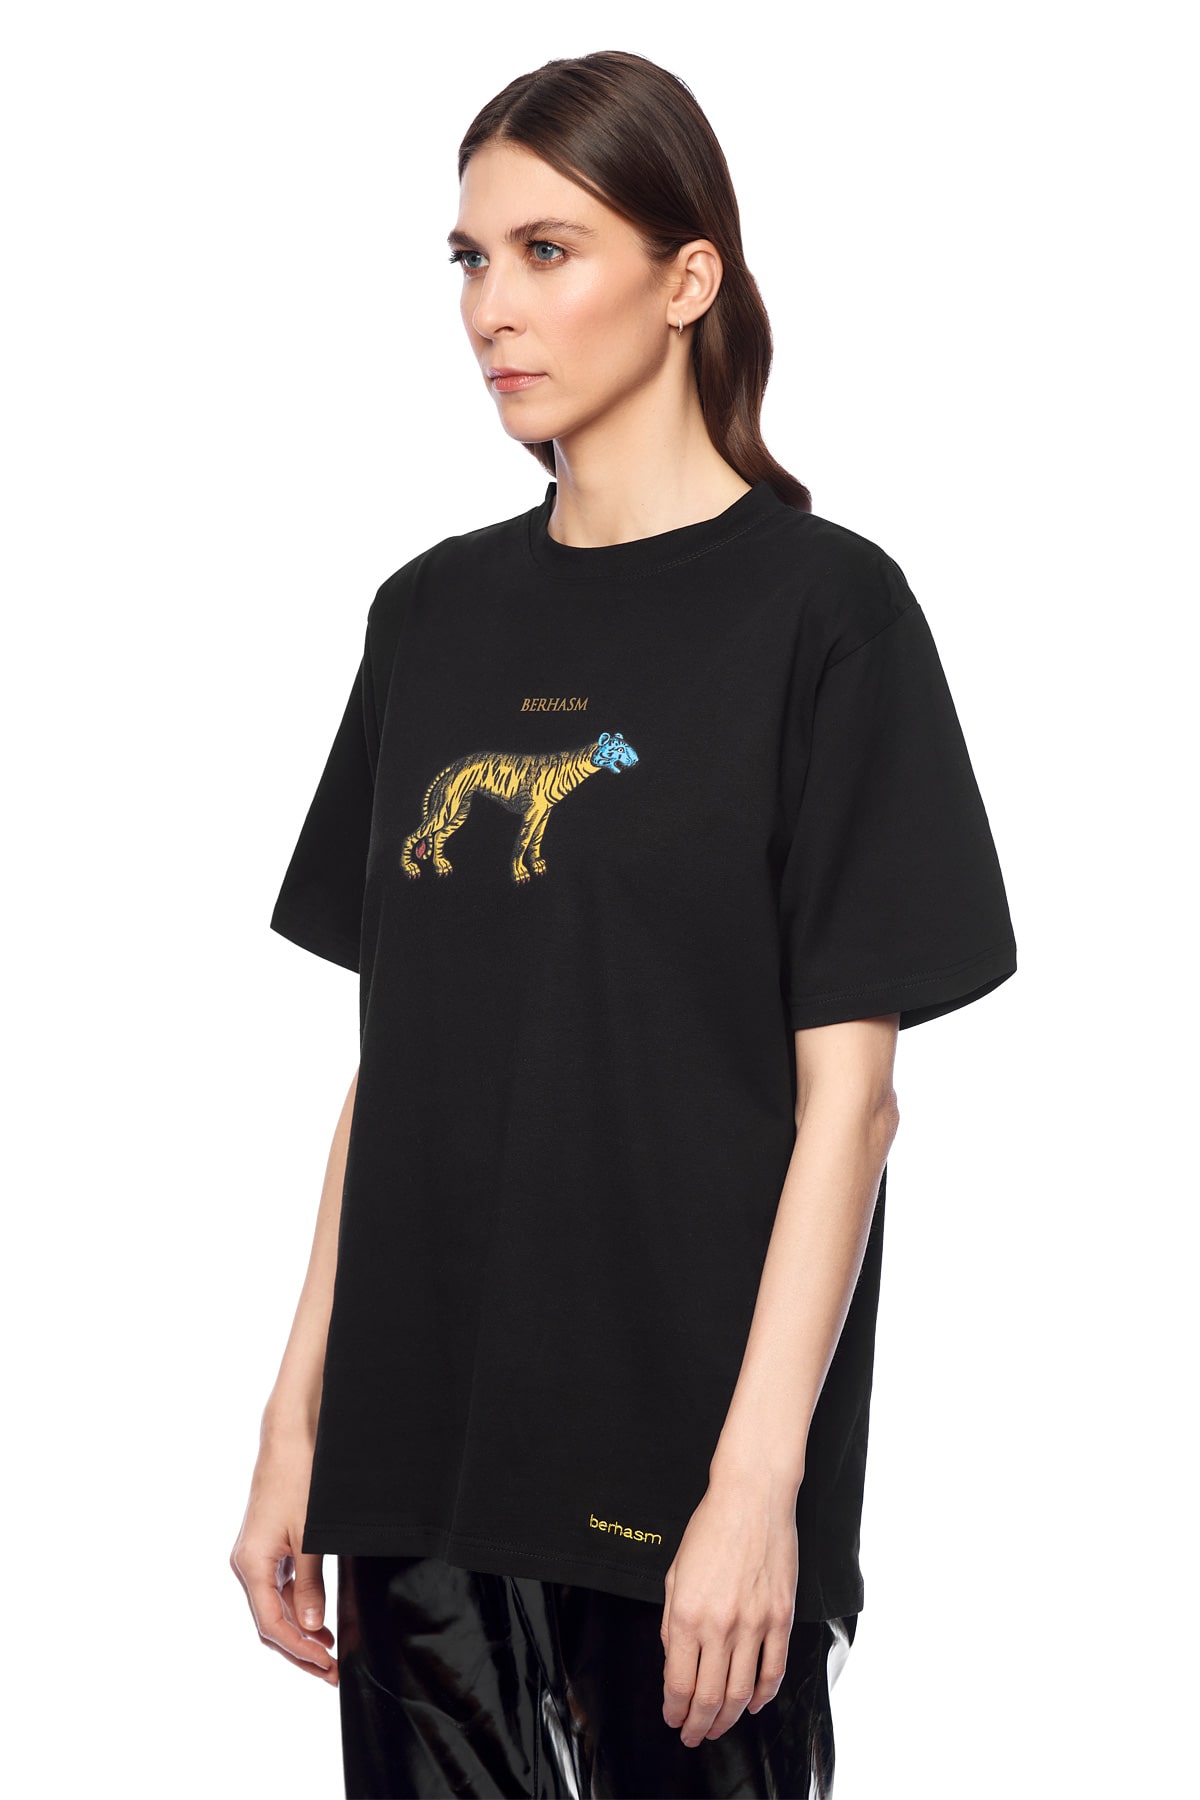 Party in the Zoo T-shirt